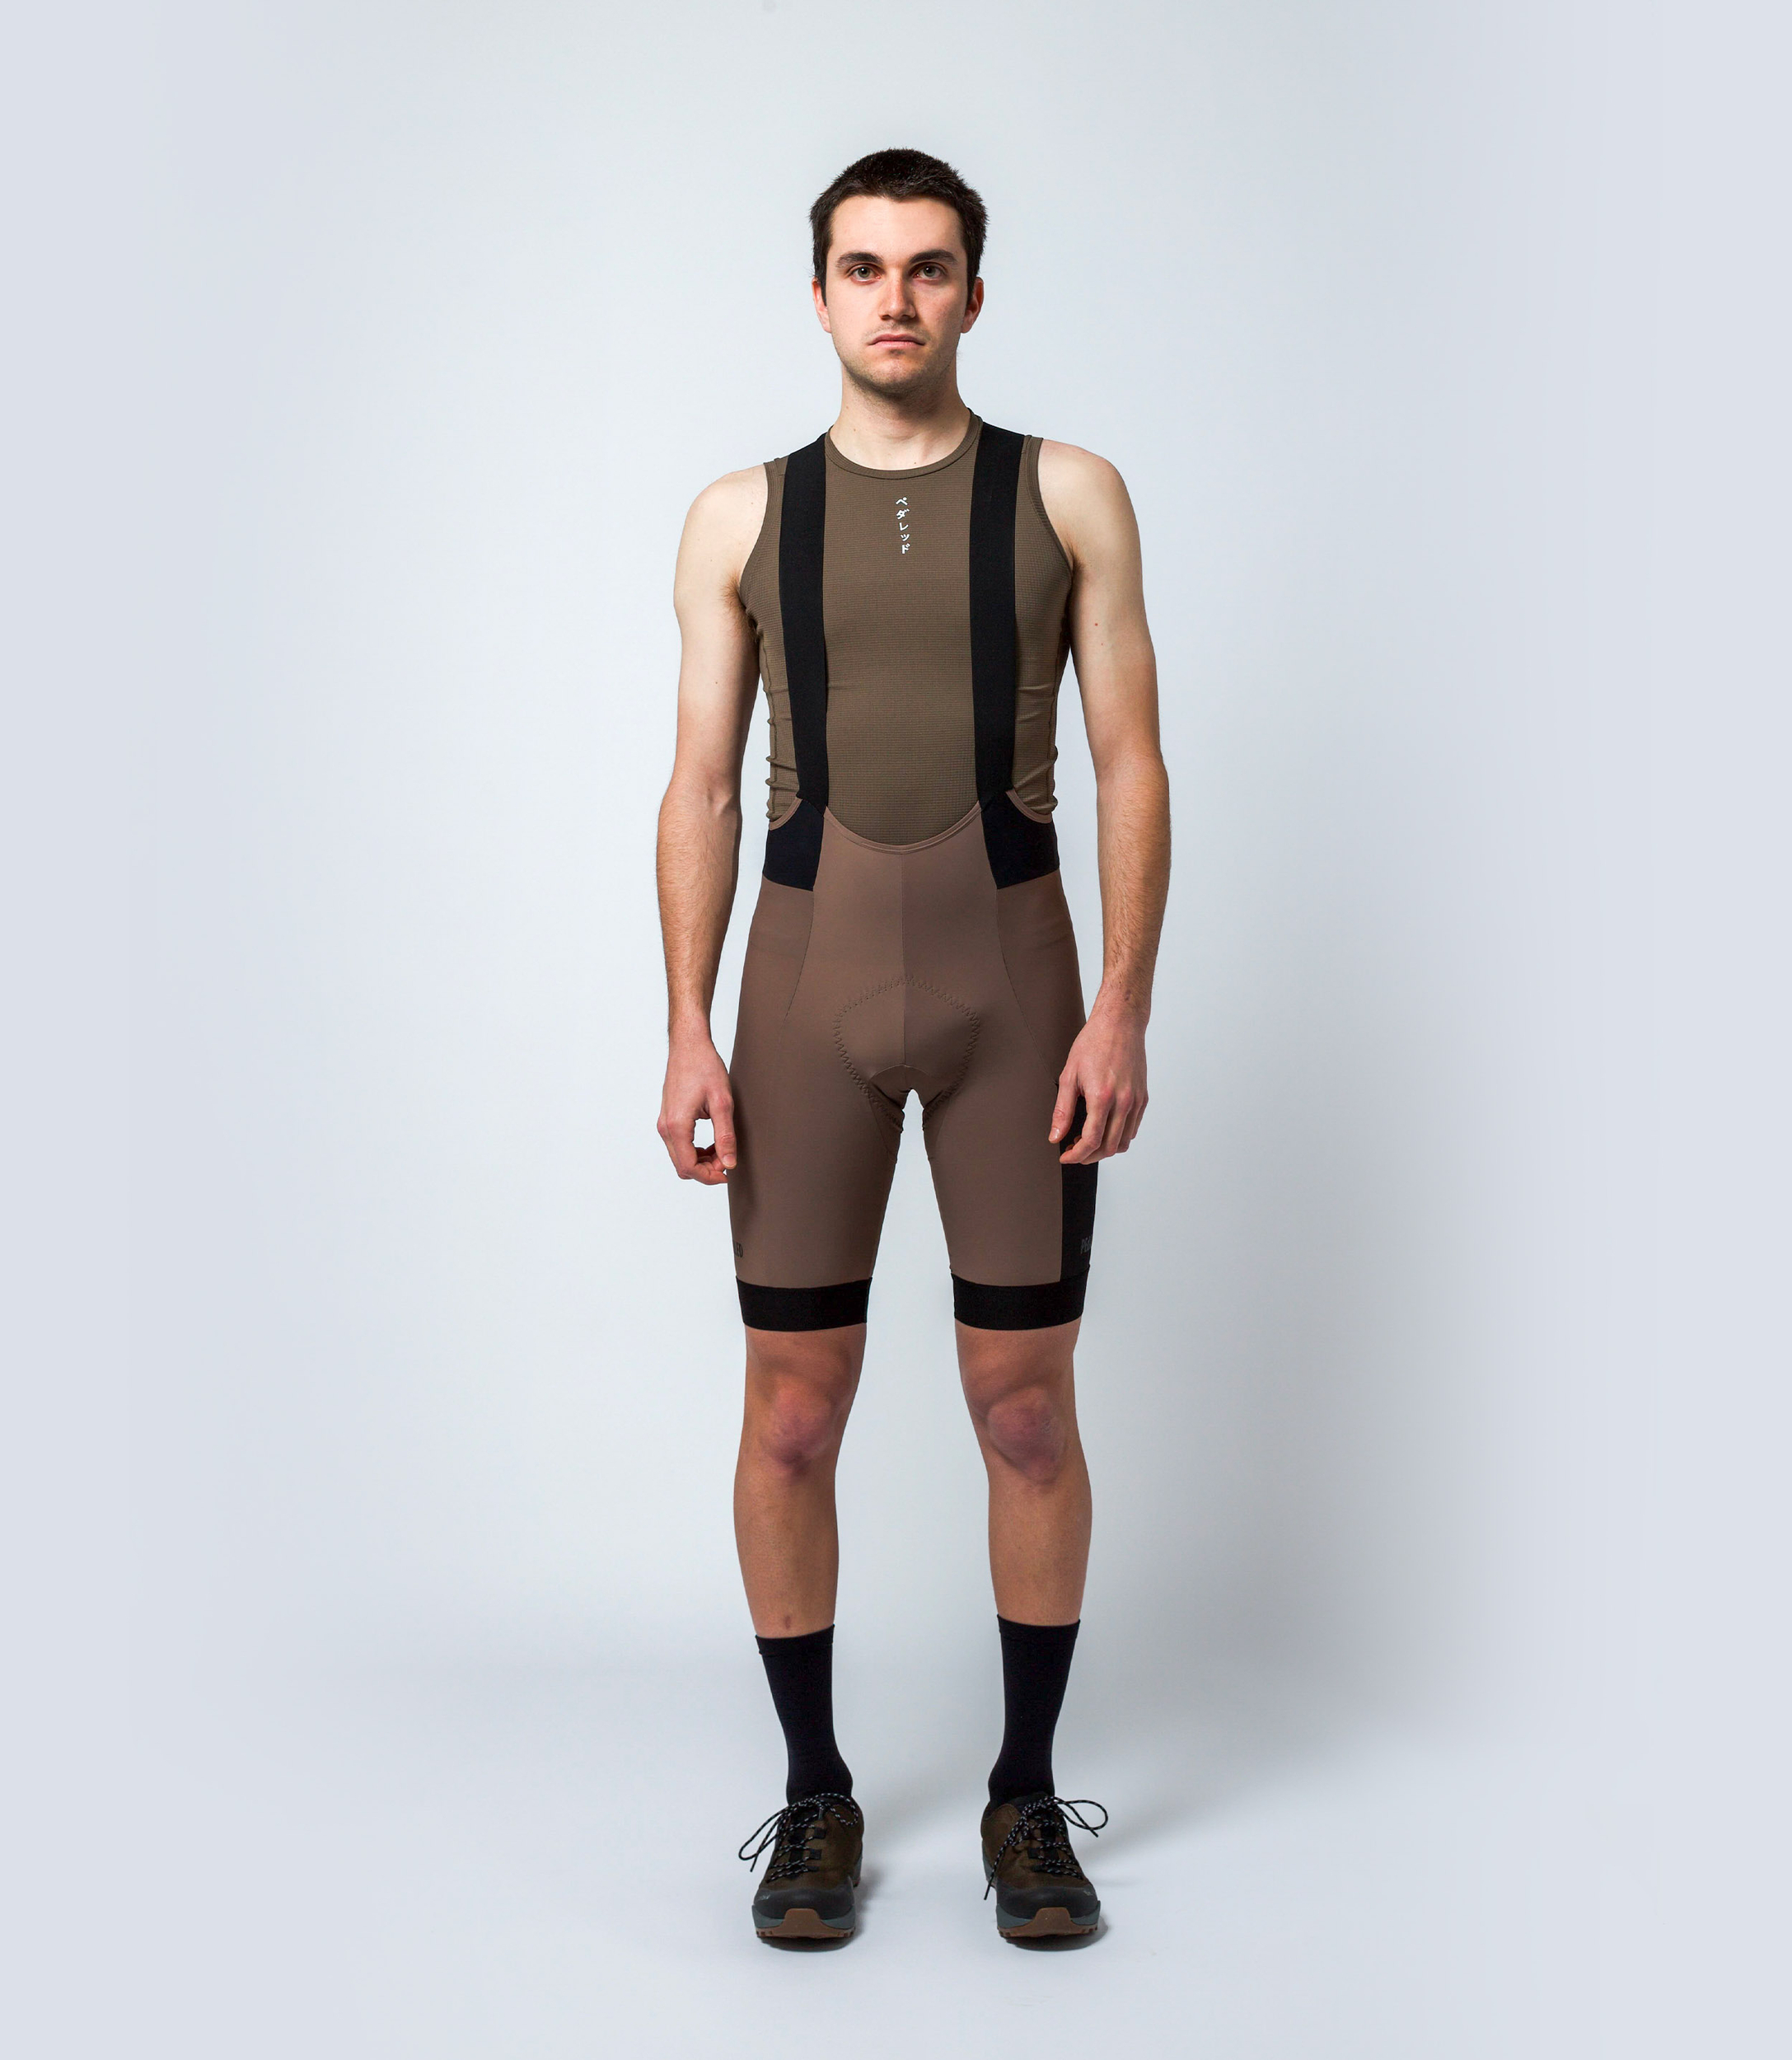 cycling-gravel-bibshorts-mermaid-jary-total-body-front-pedaled